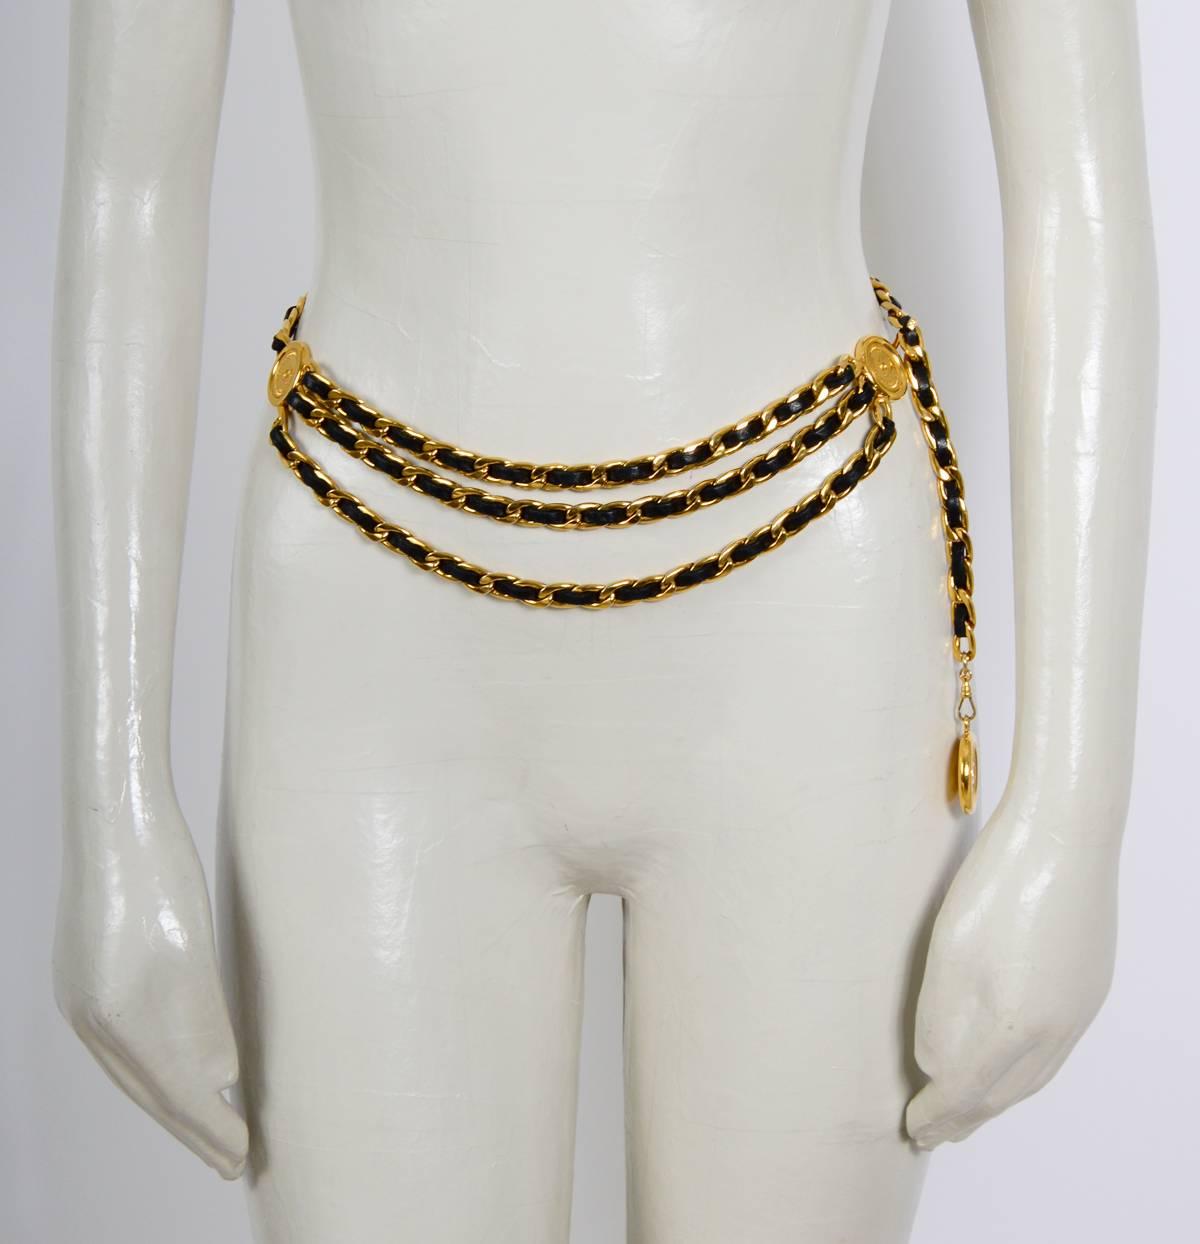 This vintage signed Chanel piece features leather stripping entwined in a gold-tone link chain with faux Chanel coil accents. Wear it as a worn as belt or necklace. Measurements Length 33inch/84cm Each faux coin states “Chanel 31 Rue Cambon Paris”